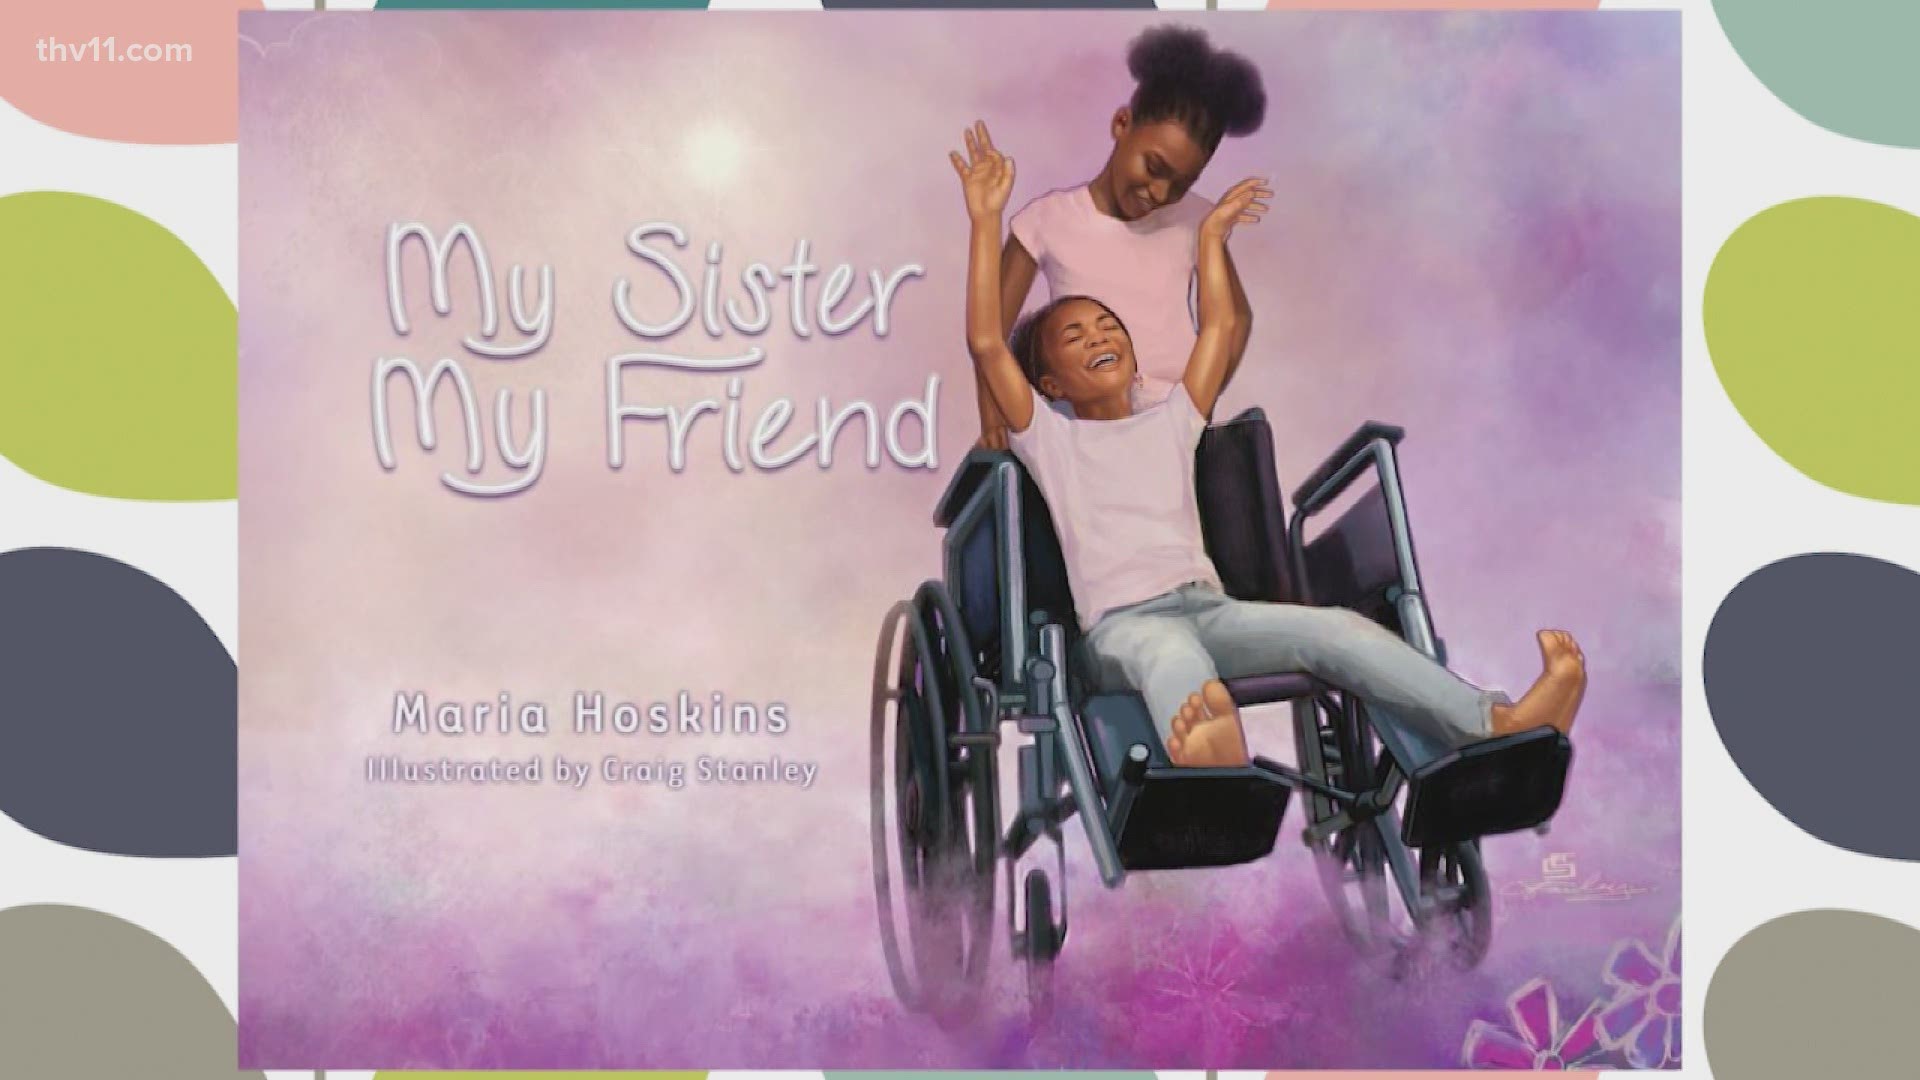 Maria Hoskins has written six children's books and her latest is focusing on the special bond between sisters.